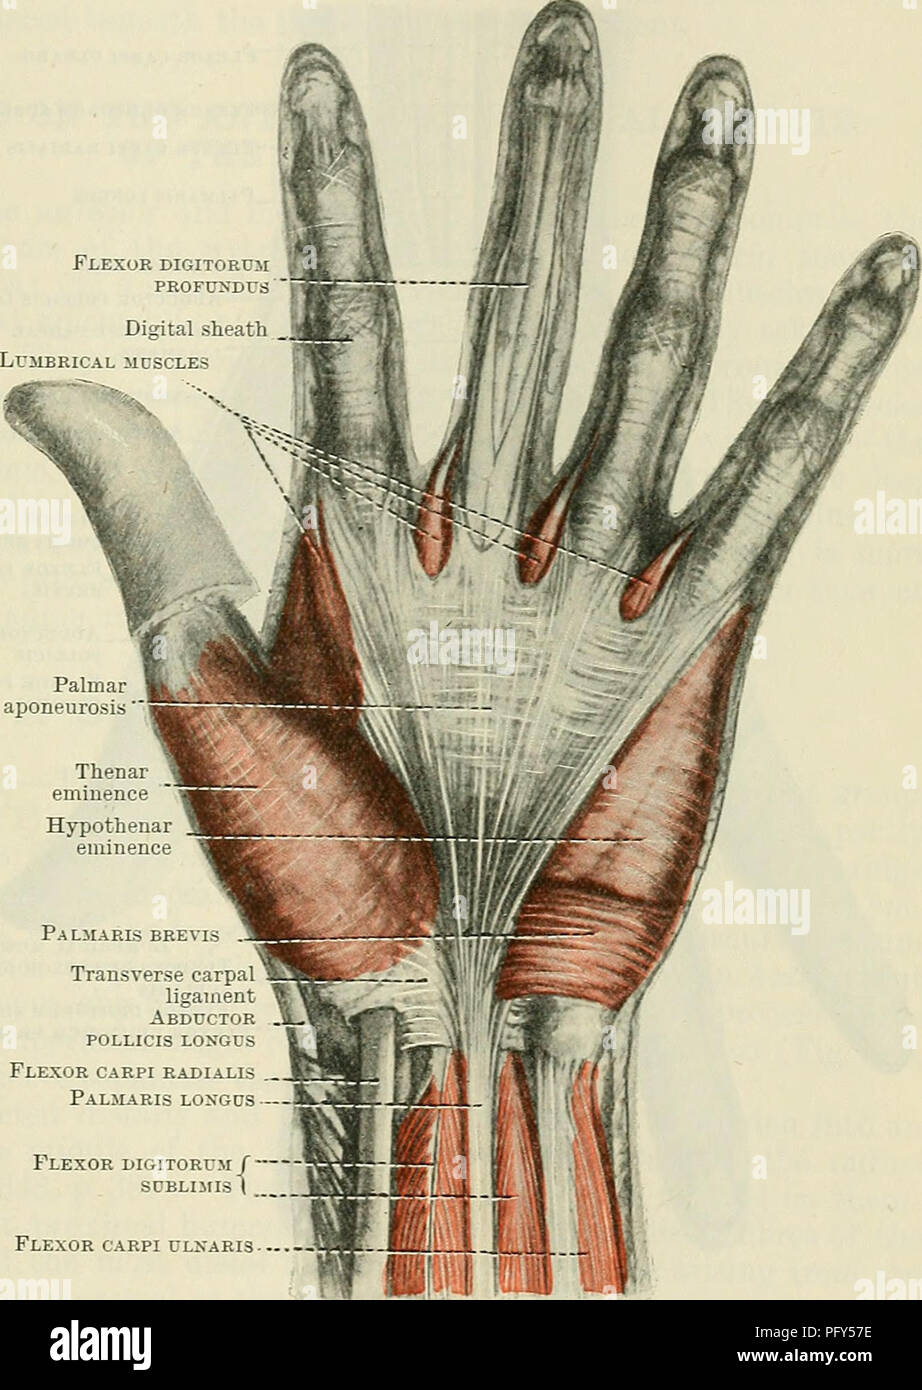 . Cunningham's Text-book of anatomy. Anatomy. FASCIA AND MUSCLES OF THE FOKEAEM AKD HAND. 383 hand. It is attached laterally to the navicular and large multangular; medially to the pisiform and os hamatum; and it forms a membranous arch binding down in the hollow of the carpus the flexor tendons of the fingers, and the median nerve. It is divided into two compartments, the larger accommodating the tendons of the flexors of the digits and the median nerve, the smaller (placed laterally) containing the tendon of the flexor carpi radialis. There are three synovial membranes in these compartments: Stock Photo